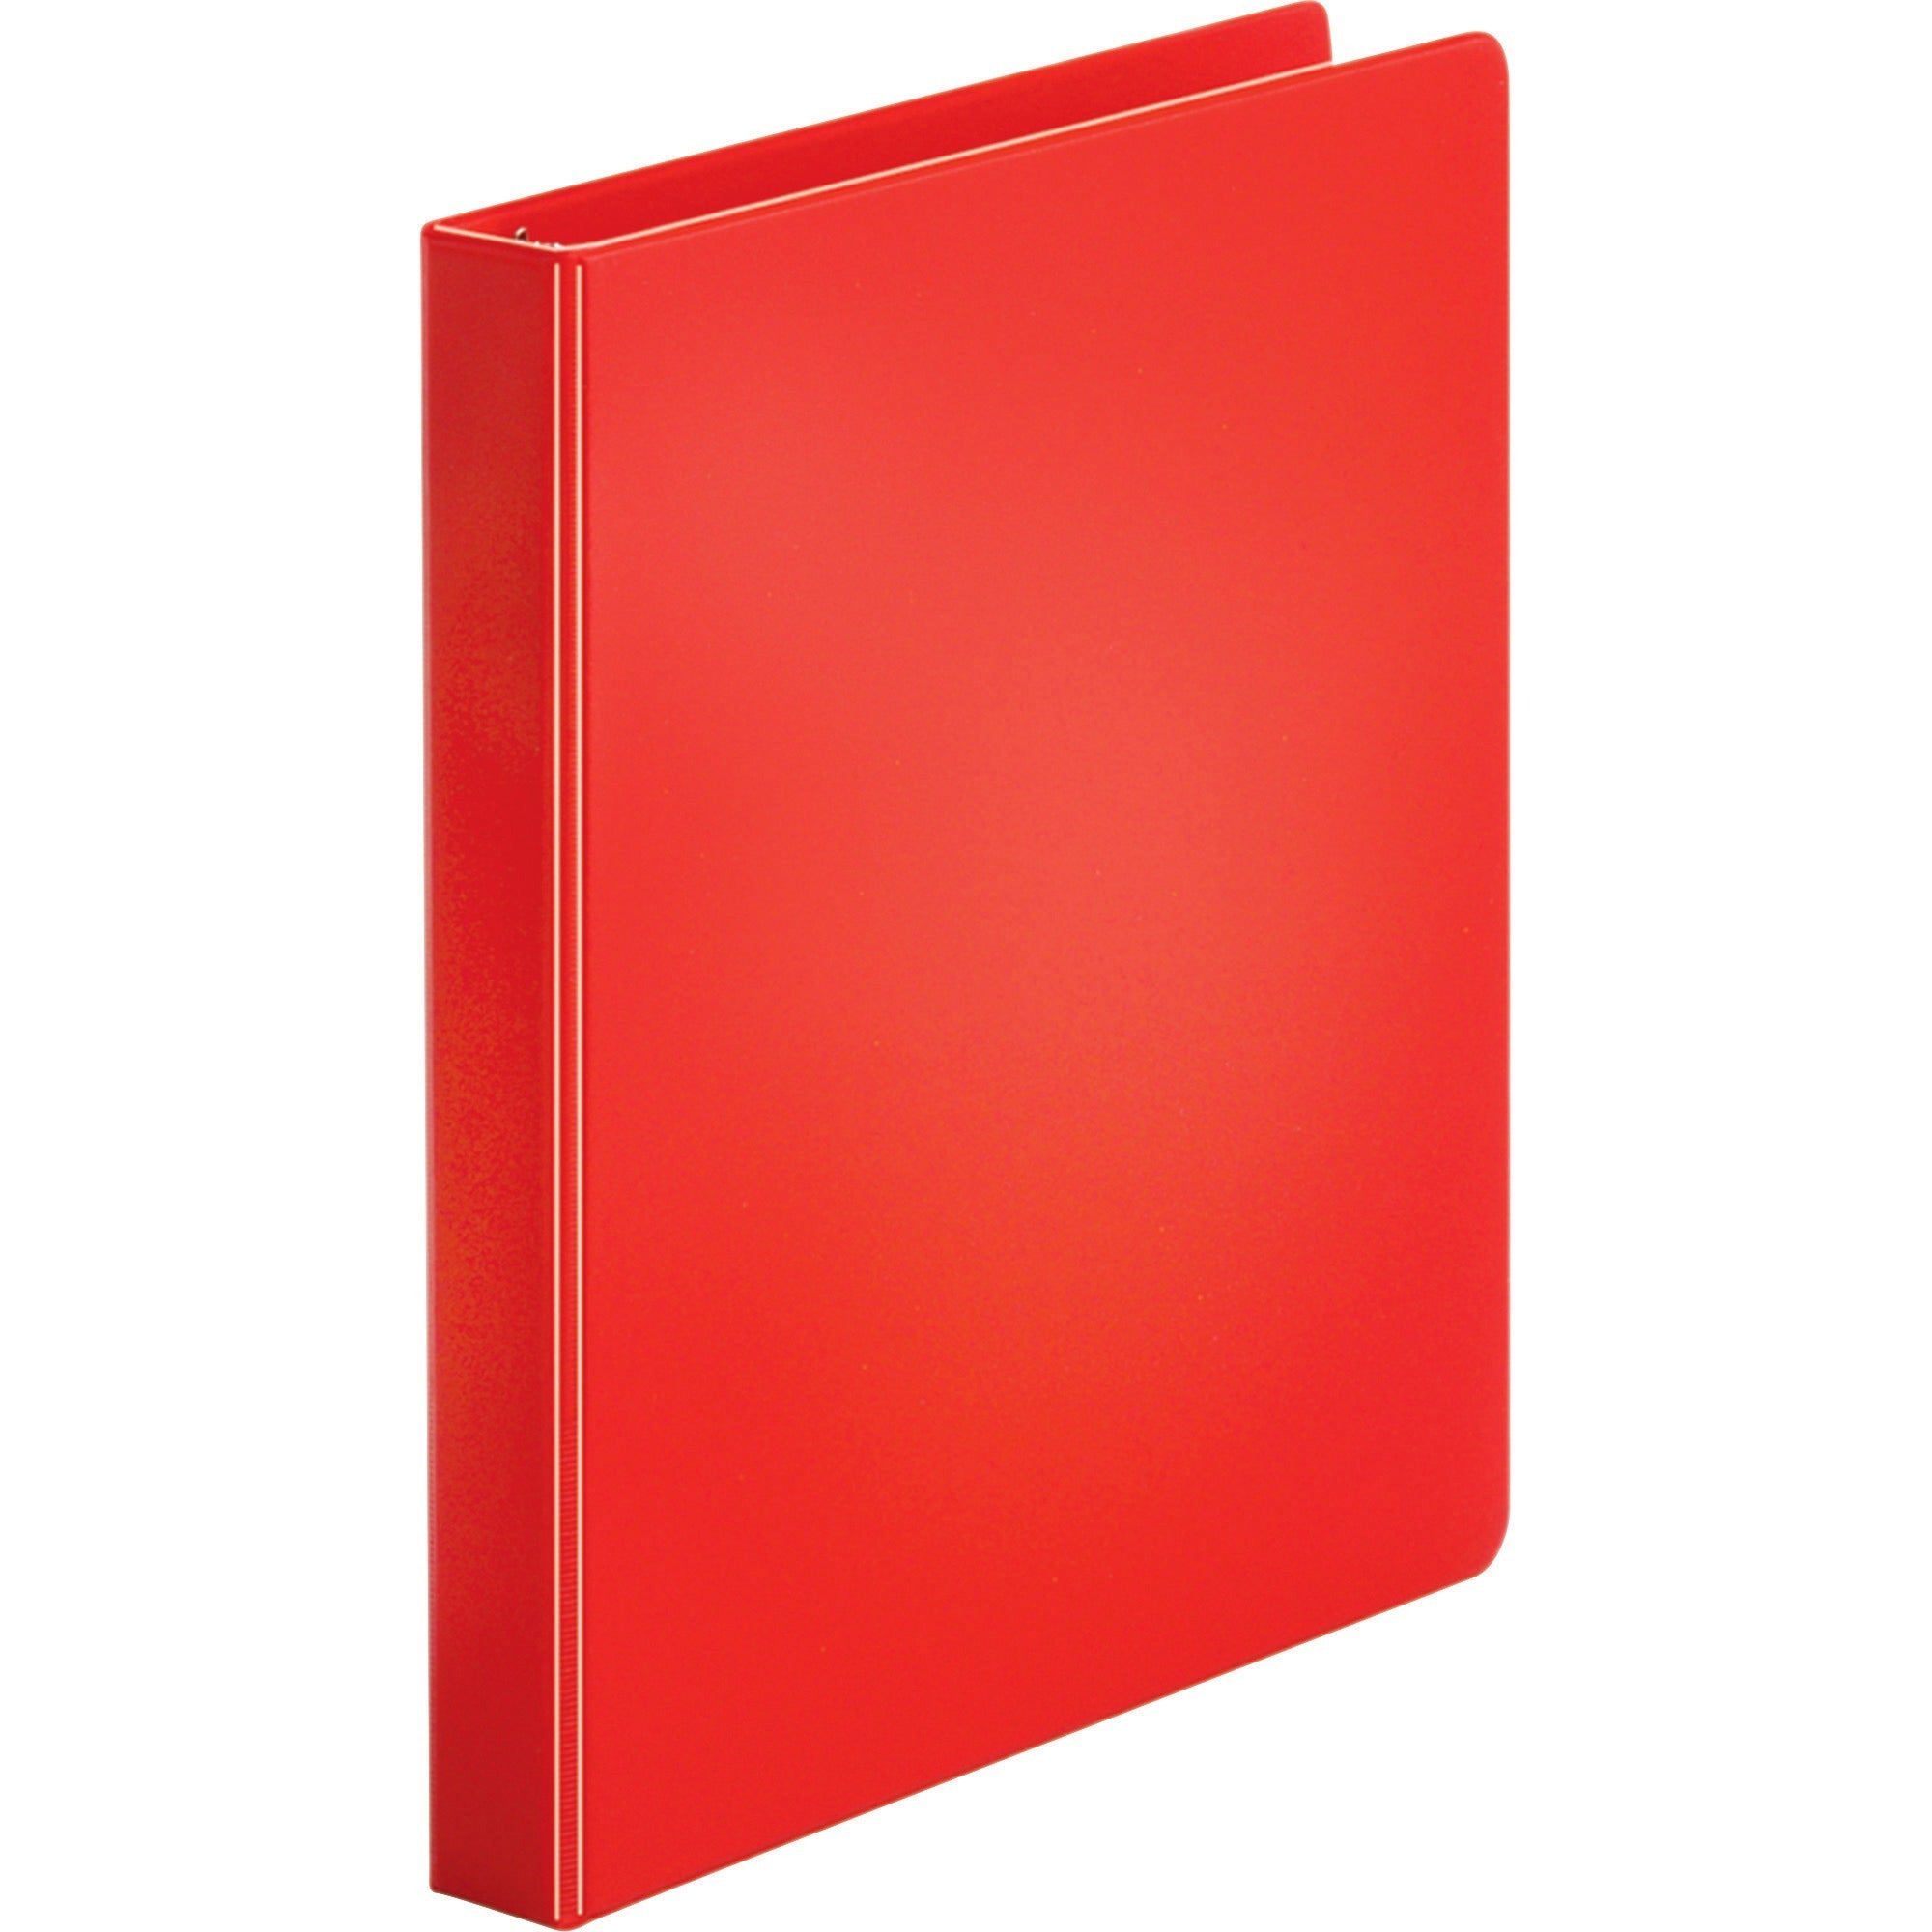 business-source-basic-round-ring-binders-1-binder-capacity-letter-8-1-2-x-11-sheet-size-225-sheet-capacity-3-x-round-ring-fasteners-internal-pockets-chipboard-polypropylene-red-exposed-rivet-sturdy-4-bundle_bsn28550bd - 2